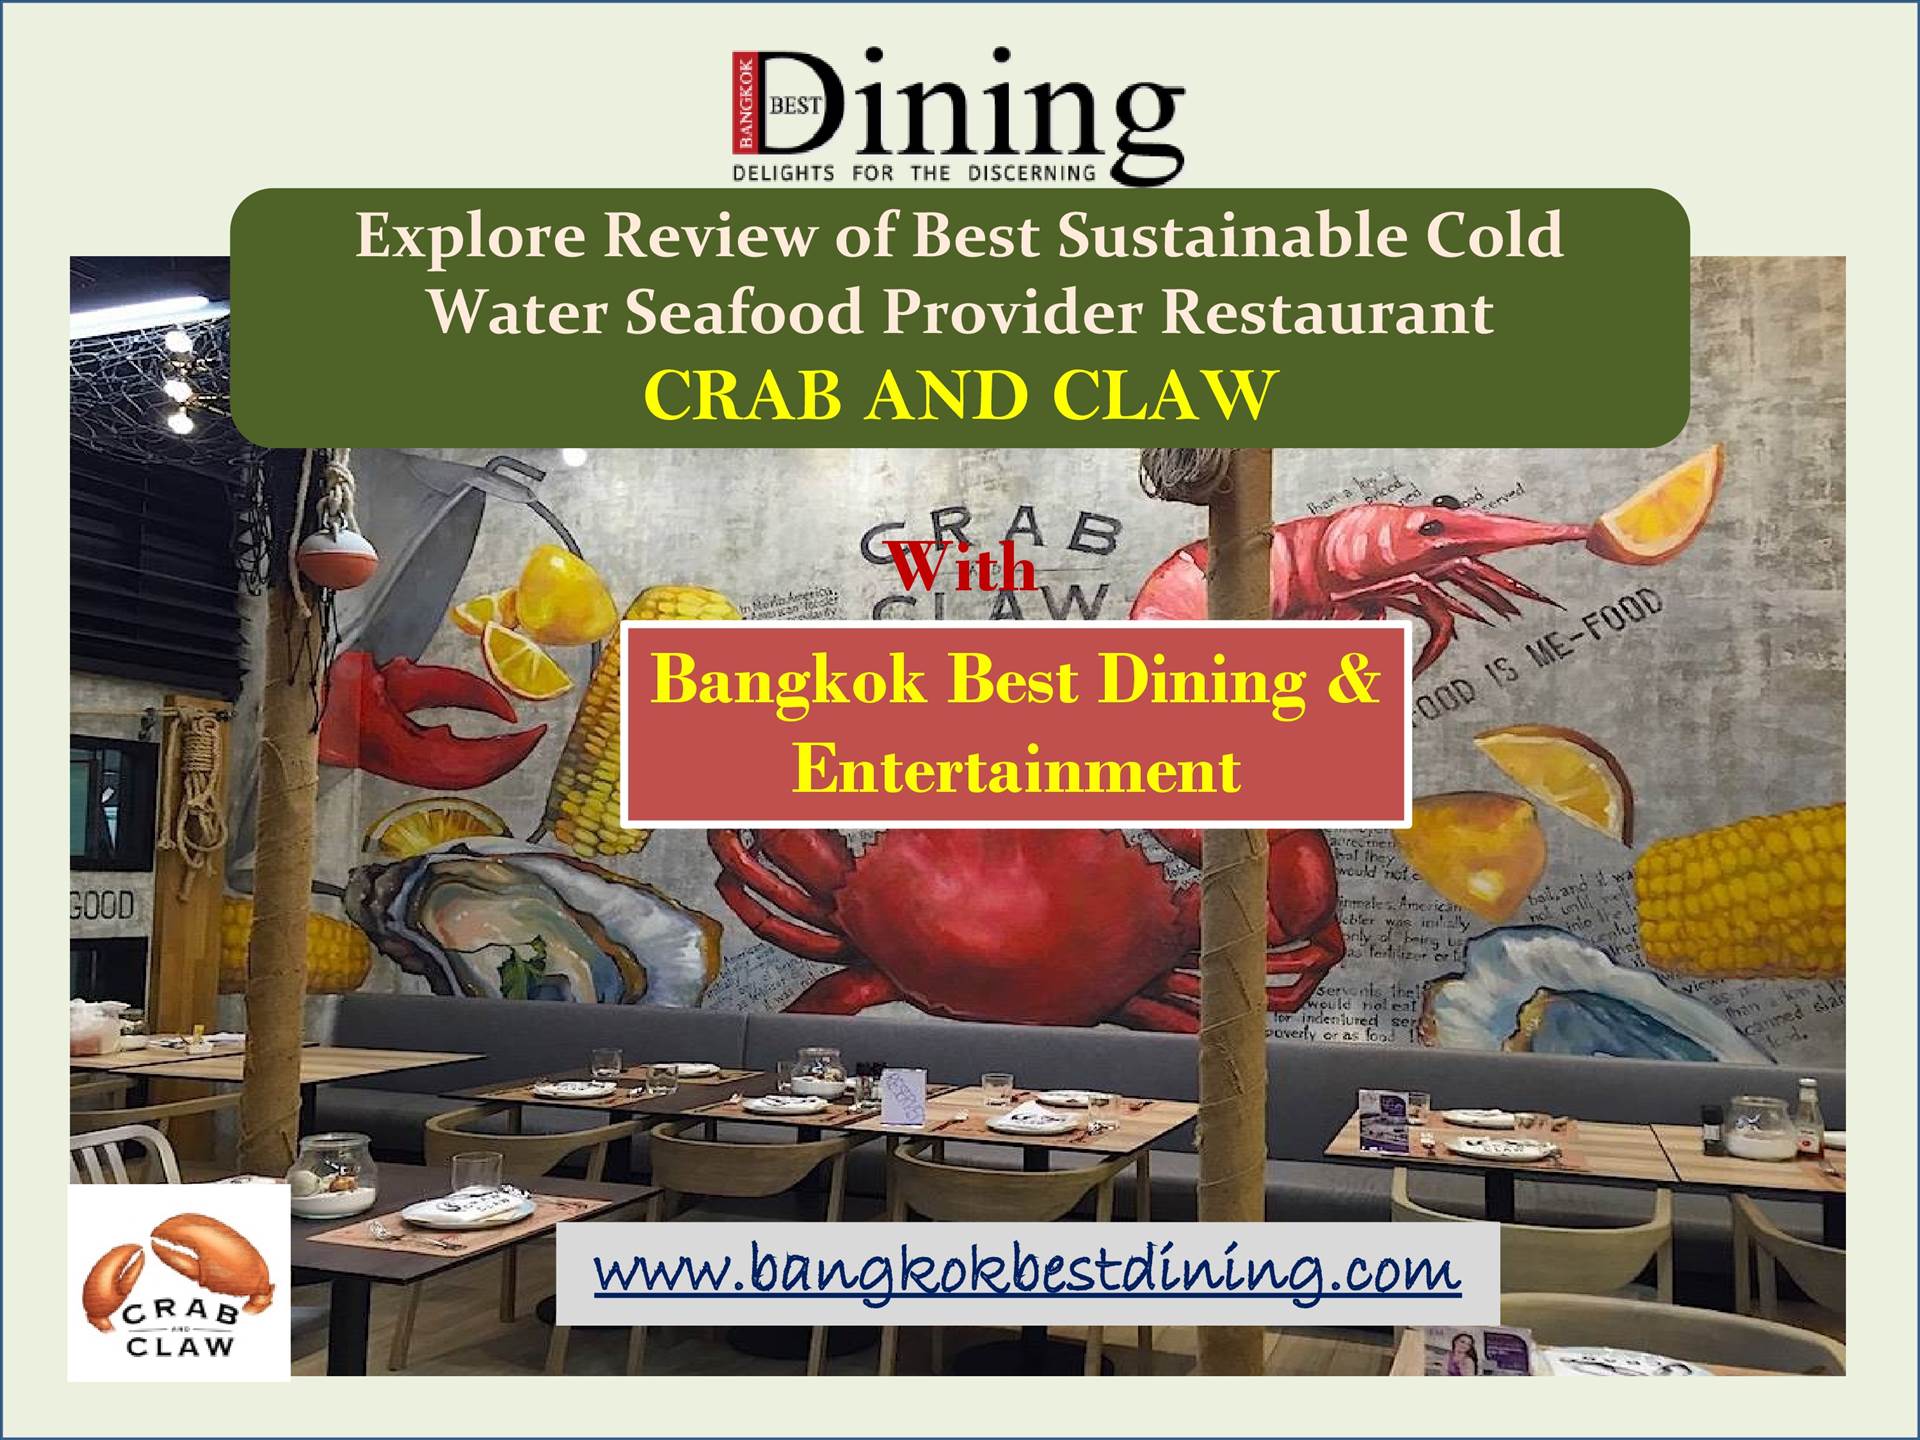 Explore Review of Best Sustainable Cold Water Seafood Provider Restaurant Best restaurants in Bangkok, Bangkok Best Restaurants, Top 10 restaurants in Bangkok, Dining in Bangkok, Bangkok Best Restaurant, Fine Dining in Bangkok, Bangkok Best Dining Guide, Bangkok Restaurant Reviews, Restaurant Magazine Bangkok by bangkokbestdining